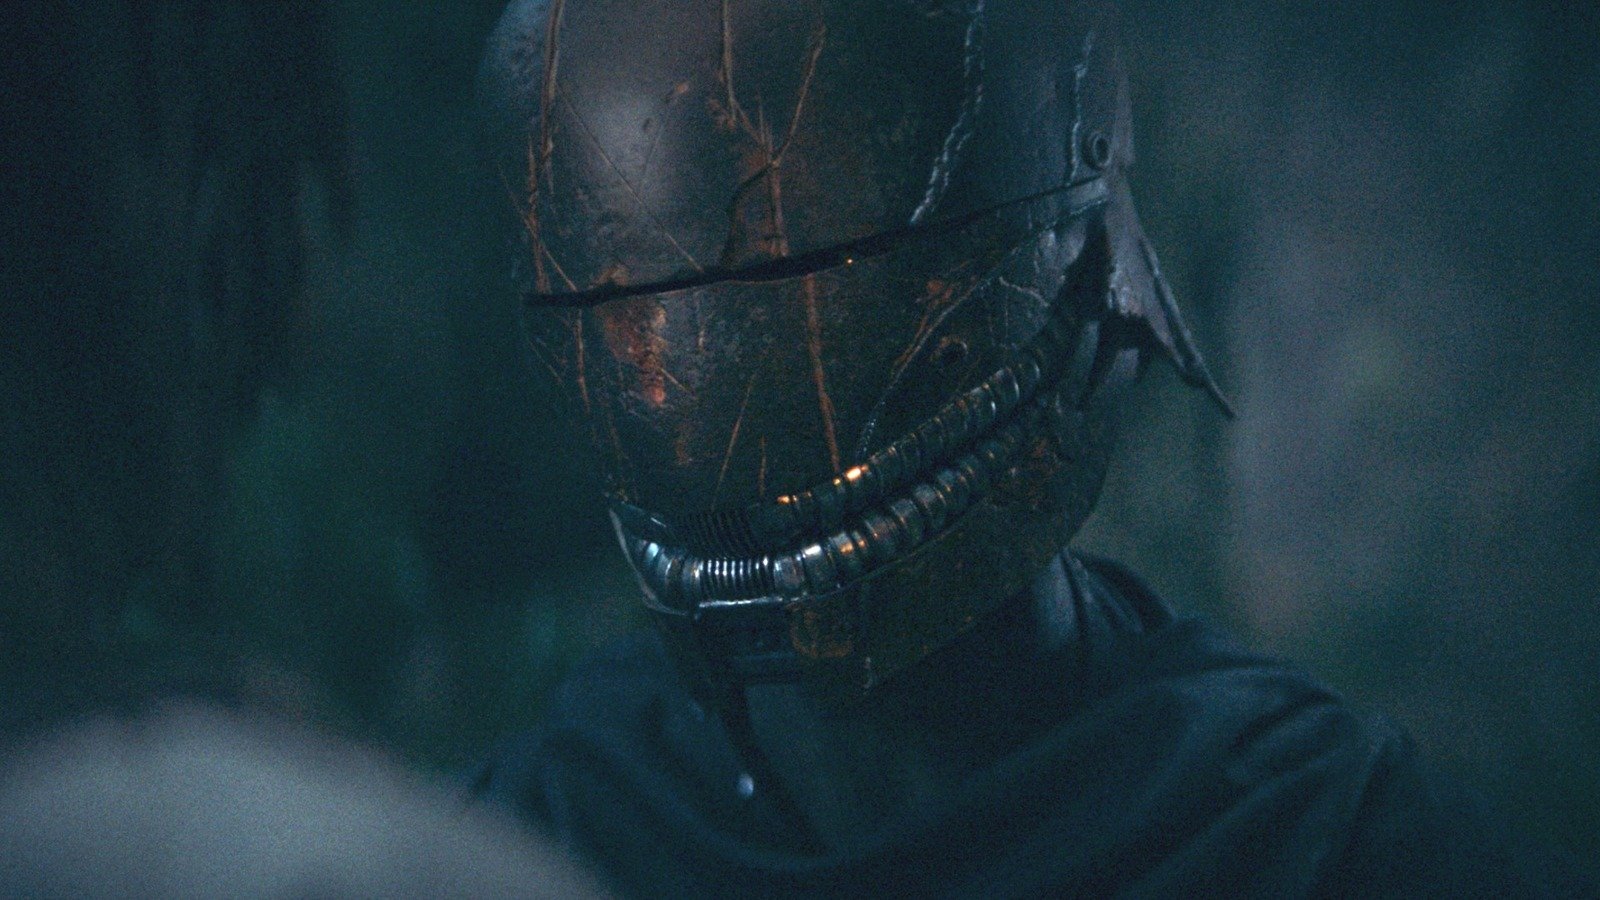 The Acolyte Episode 5 Secretly Teased The Villain's Connection To... Kylo Ren?